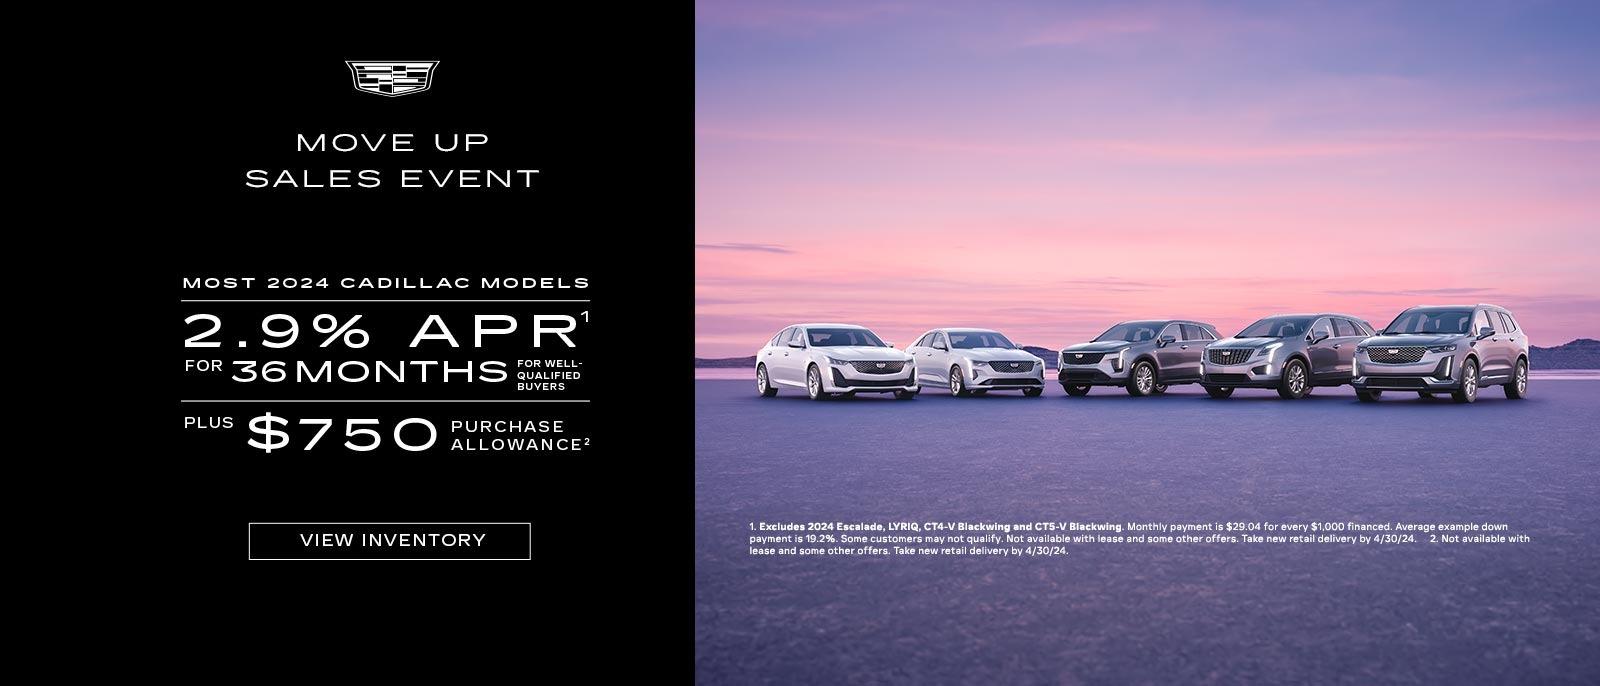 MOST 2024 CADILLAC MODELS. 2.9% APR for 36 MONTHS For well qualified buyers. Plus $750 PURCHASE ALLOWANCE.